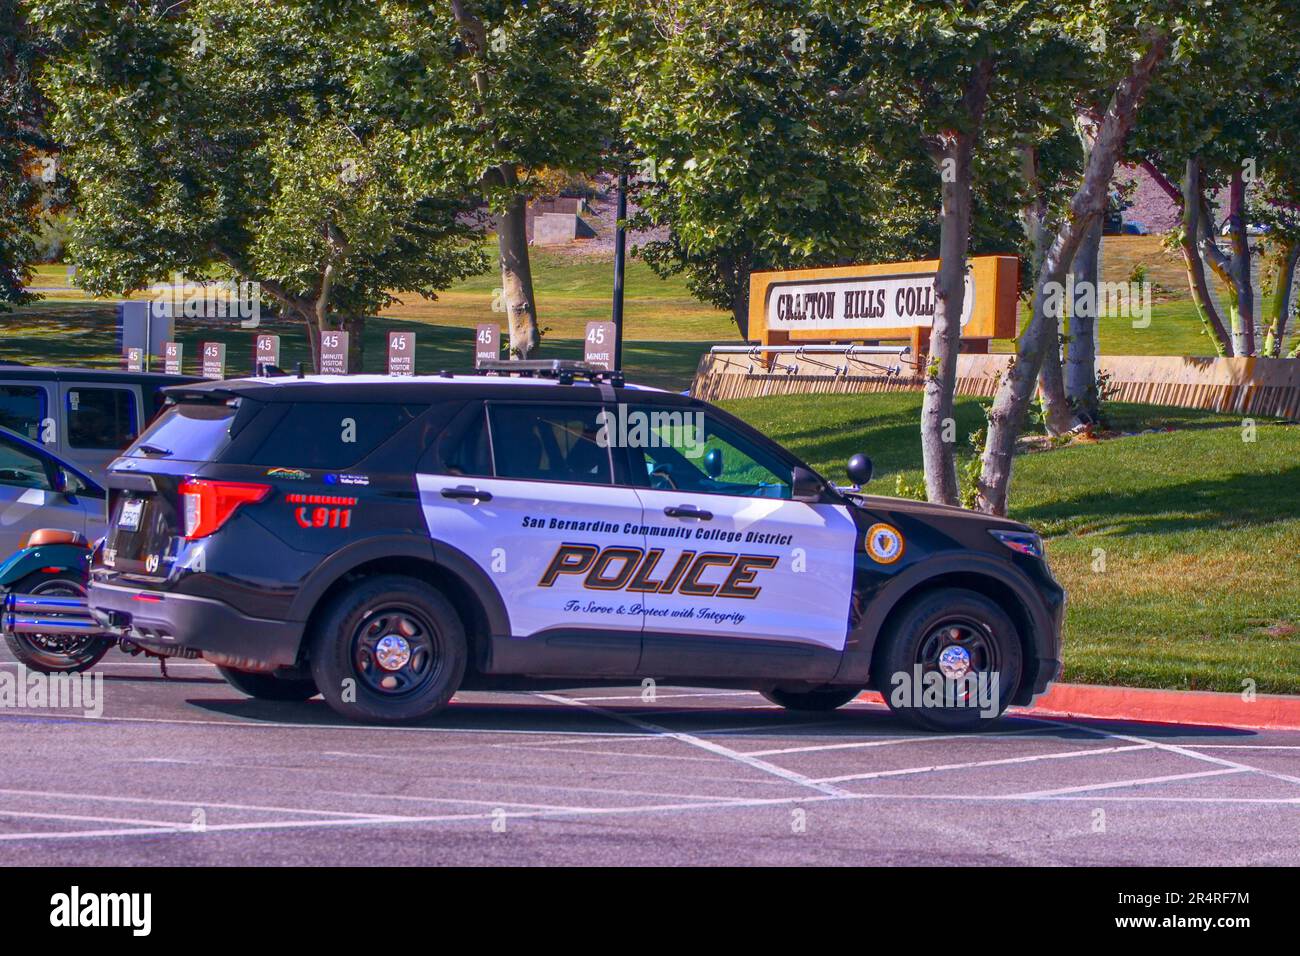 A photograph showcasing a San Bernardino Community College Police Vehicle, with the Crafton Hills College sign prominently displayed in the background Stock Photo